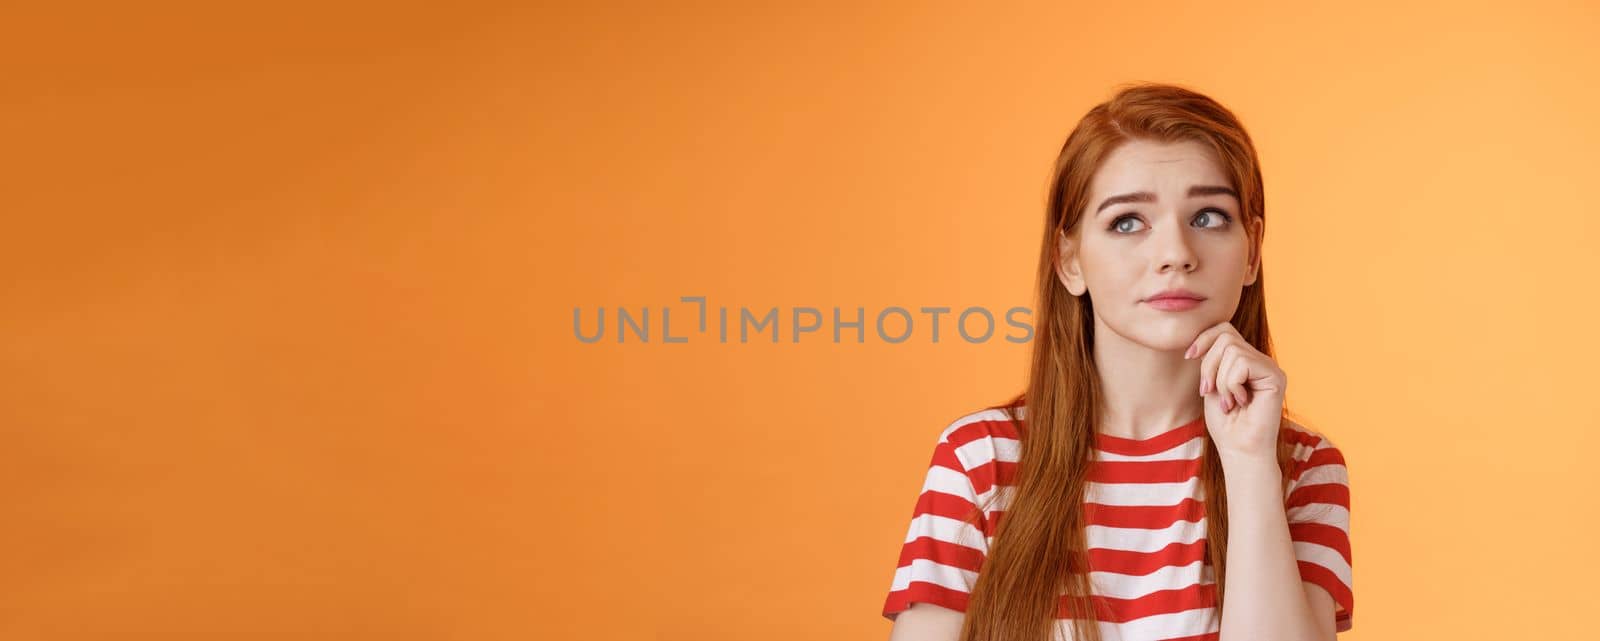 Close-up uneasy cute redhead female student facing tough troublesome decision, thinking intense, look upper left corner thoughtful touch chin, pondering between choices, frown focused.